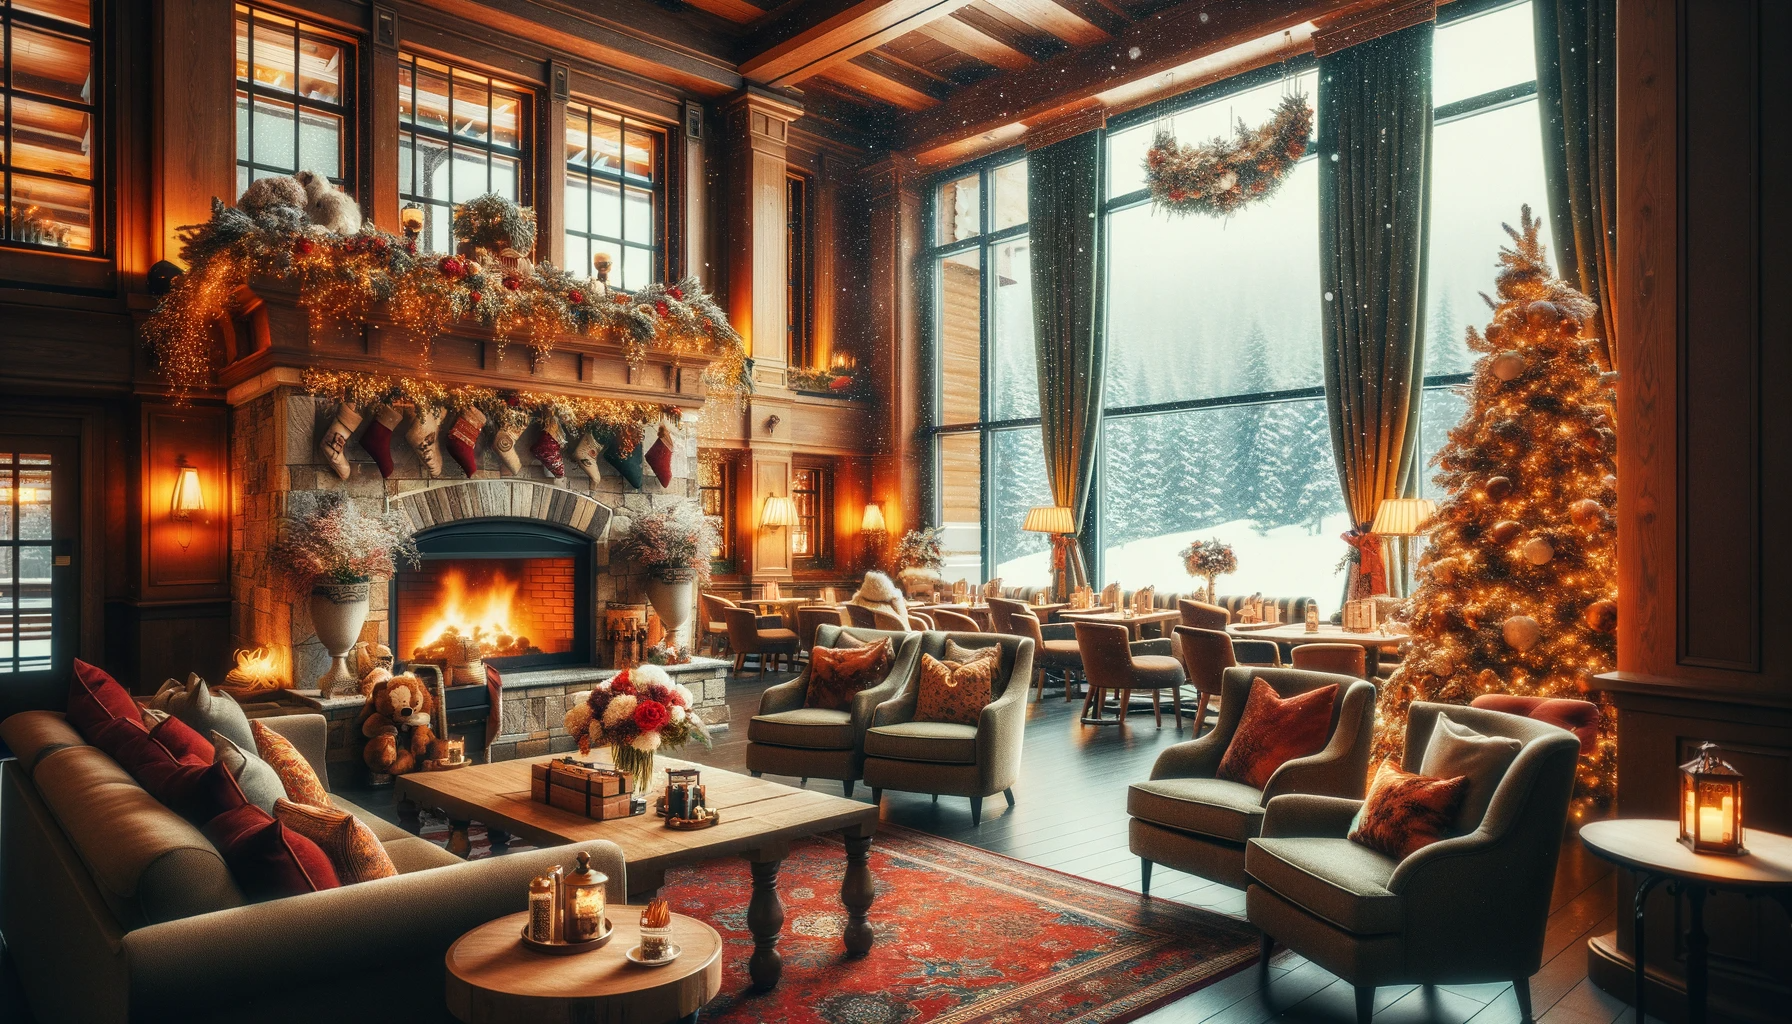 Warm winter welcome in a hotel lobby